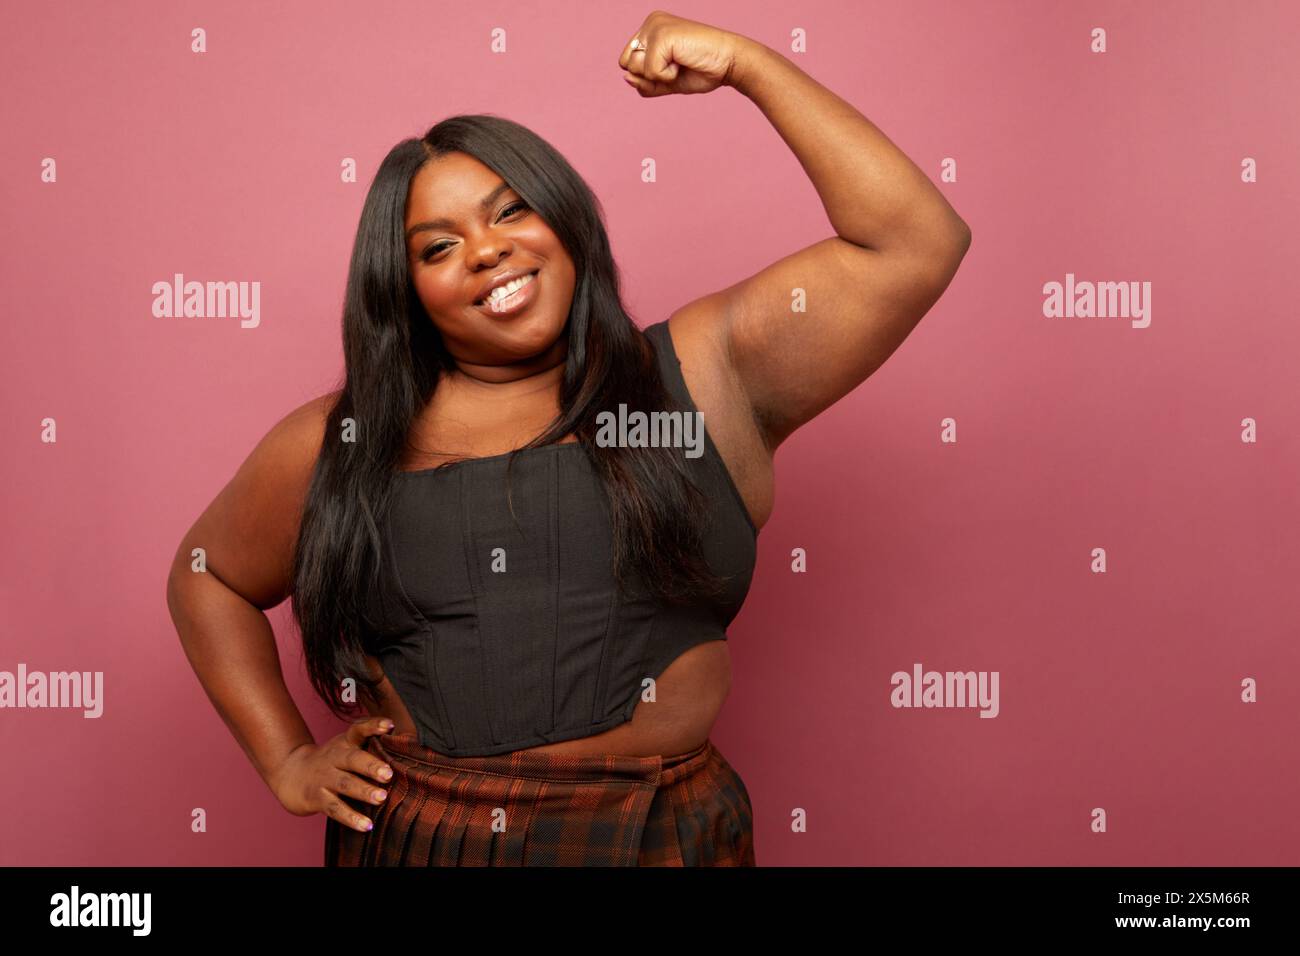 Studio portrait of woman flexing muscles against pink background Stock Photo